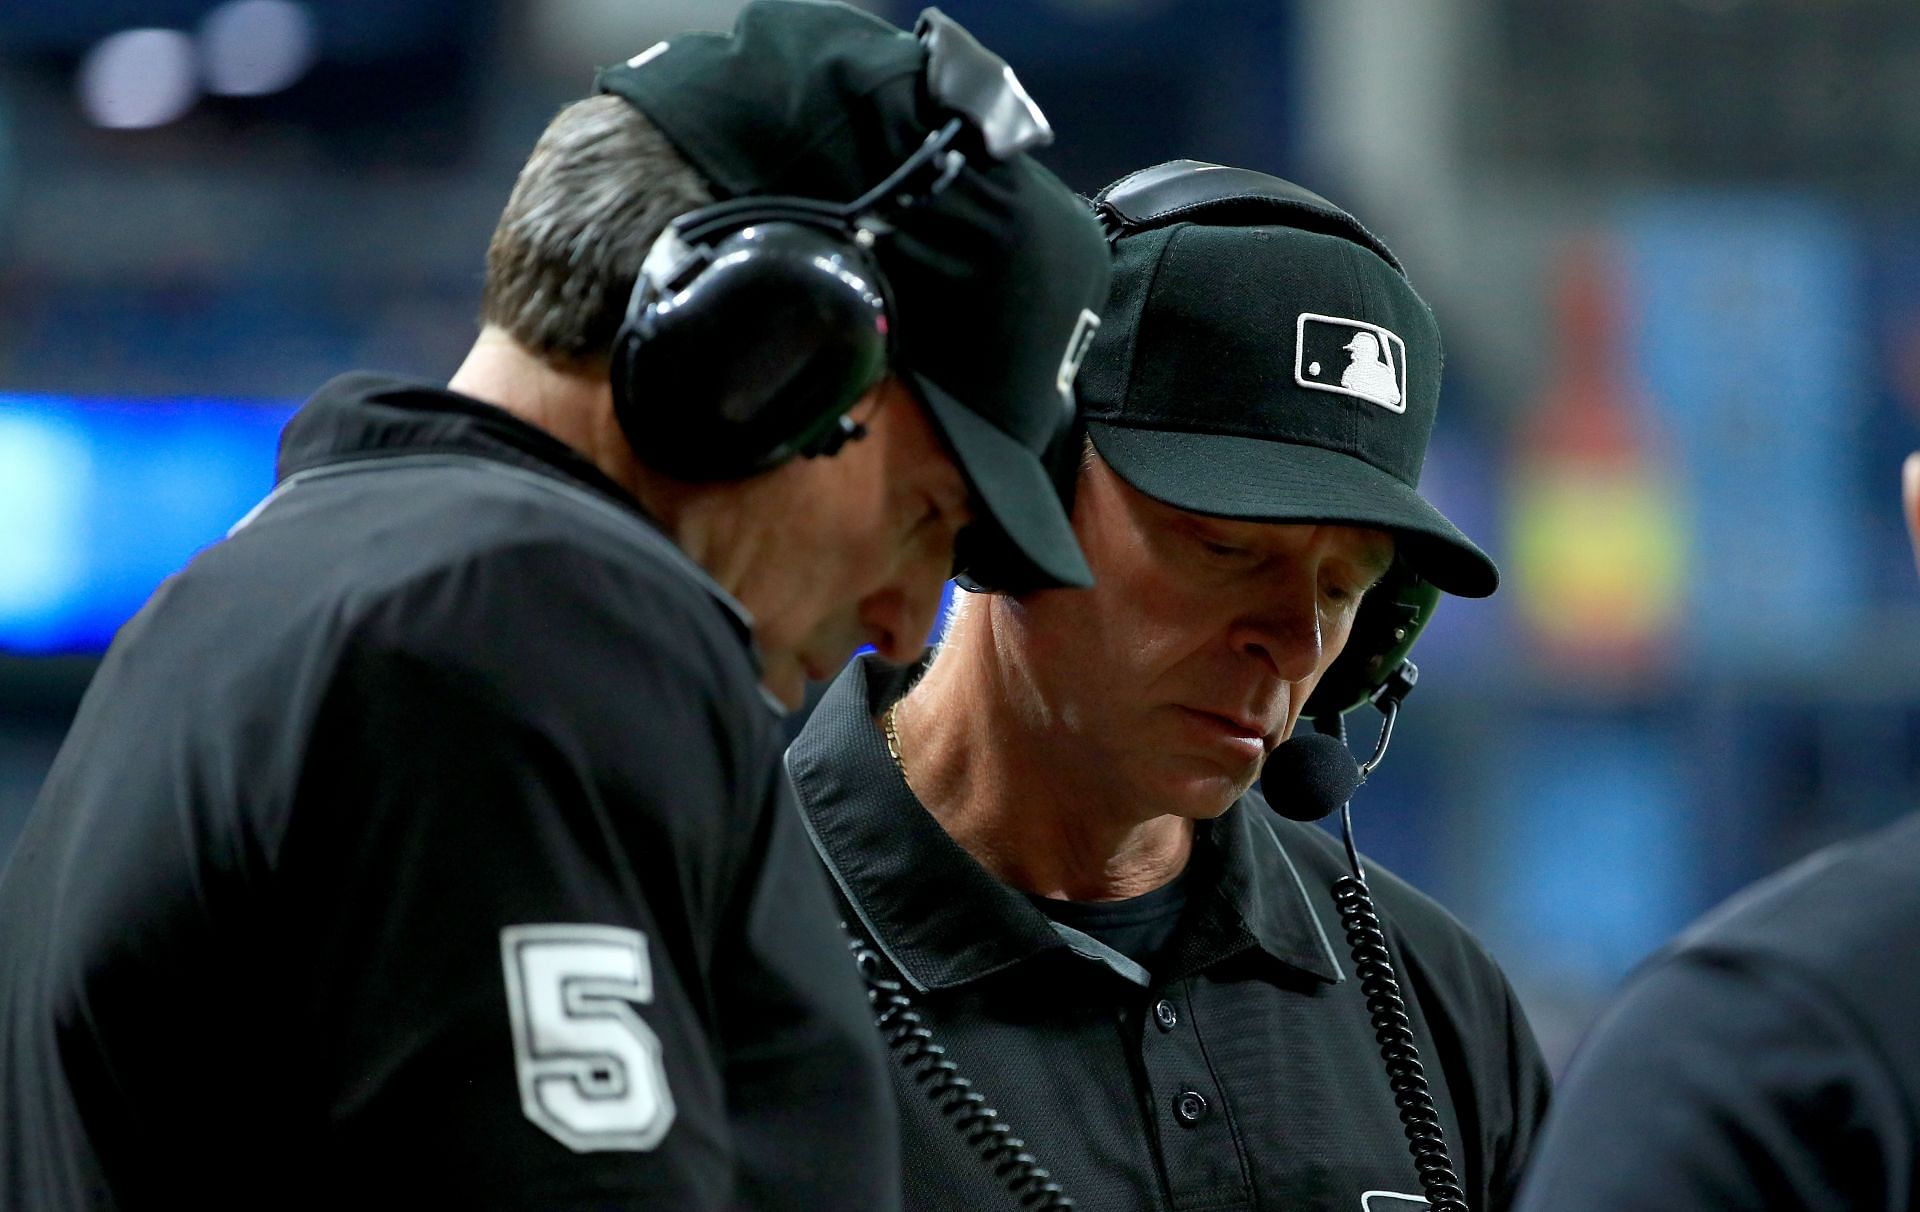 Umpires review a call during a Boston Red Sox v Tampa Bay Rays game.